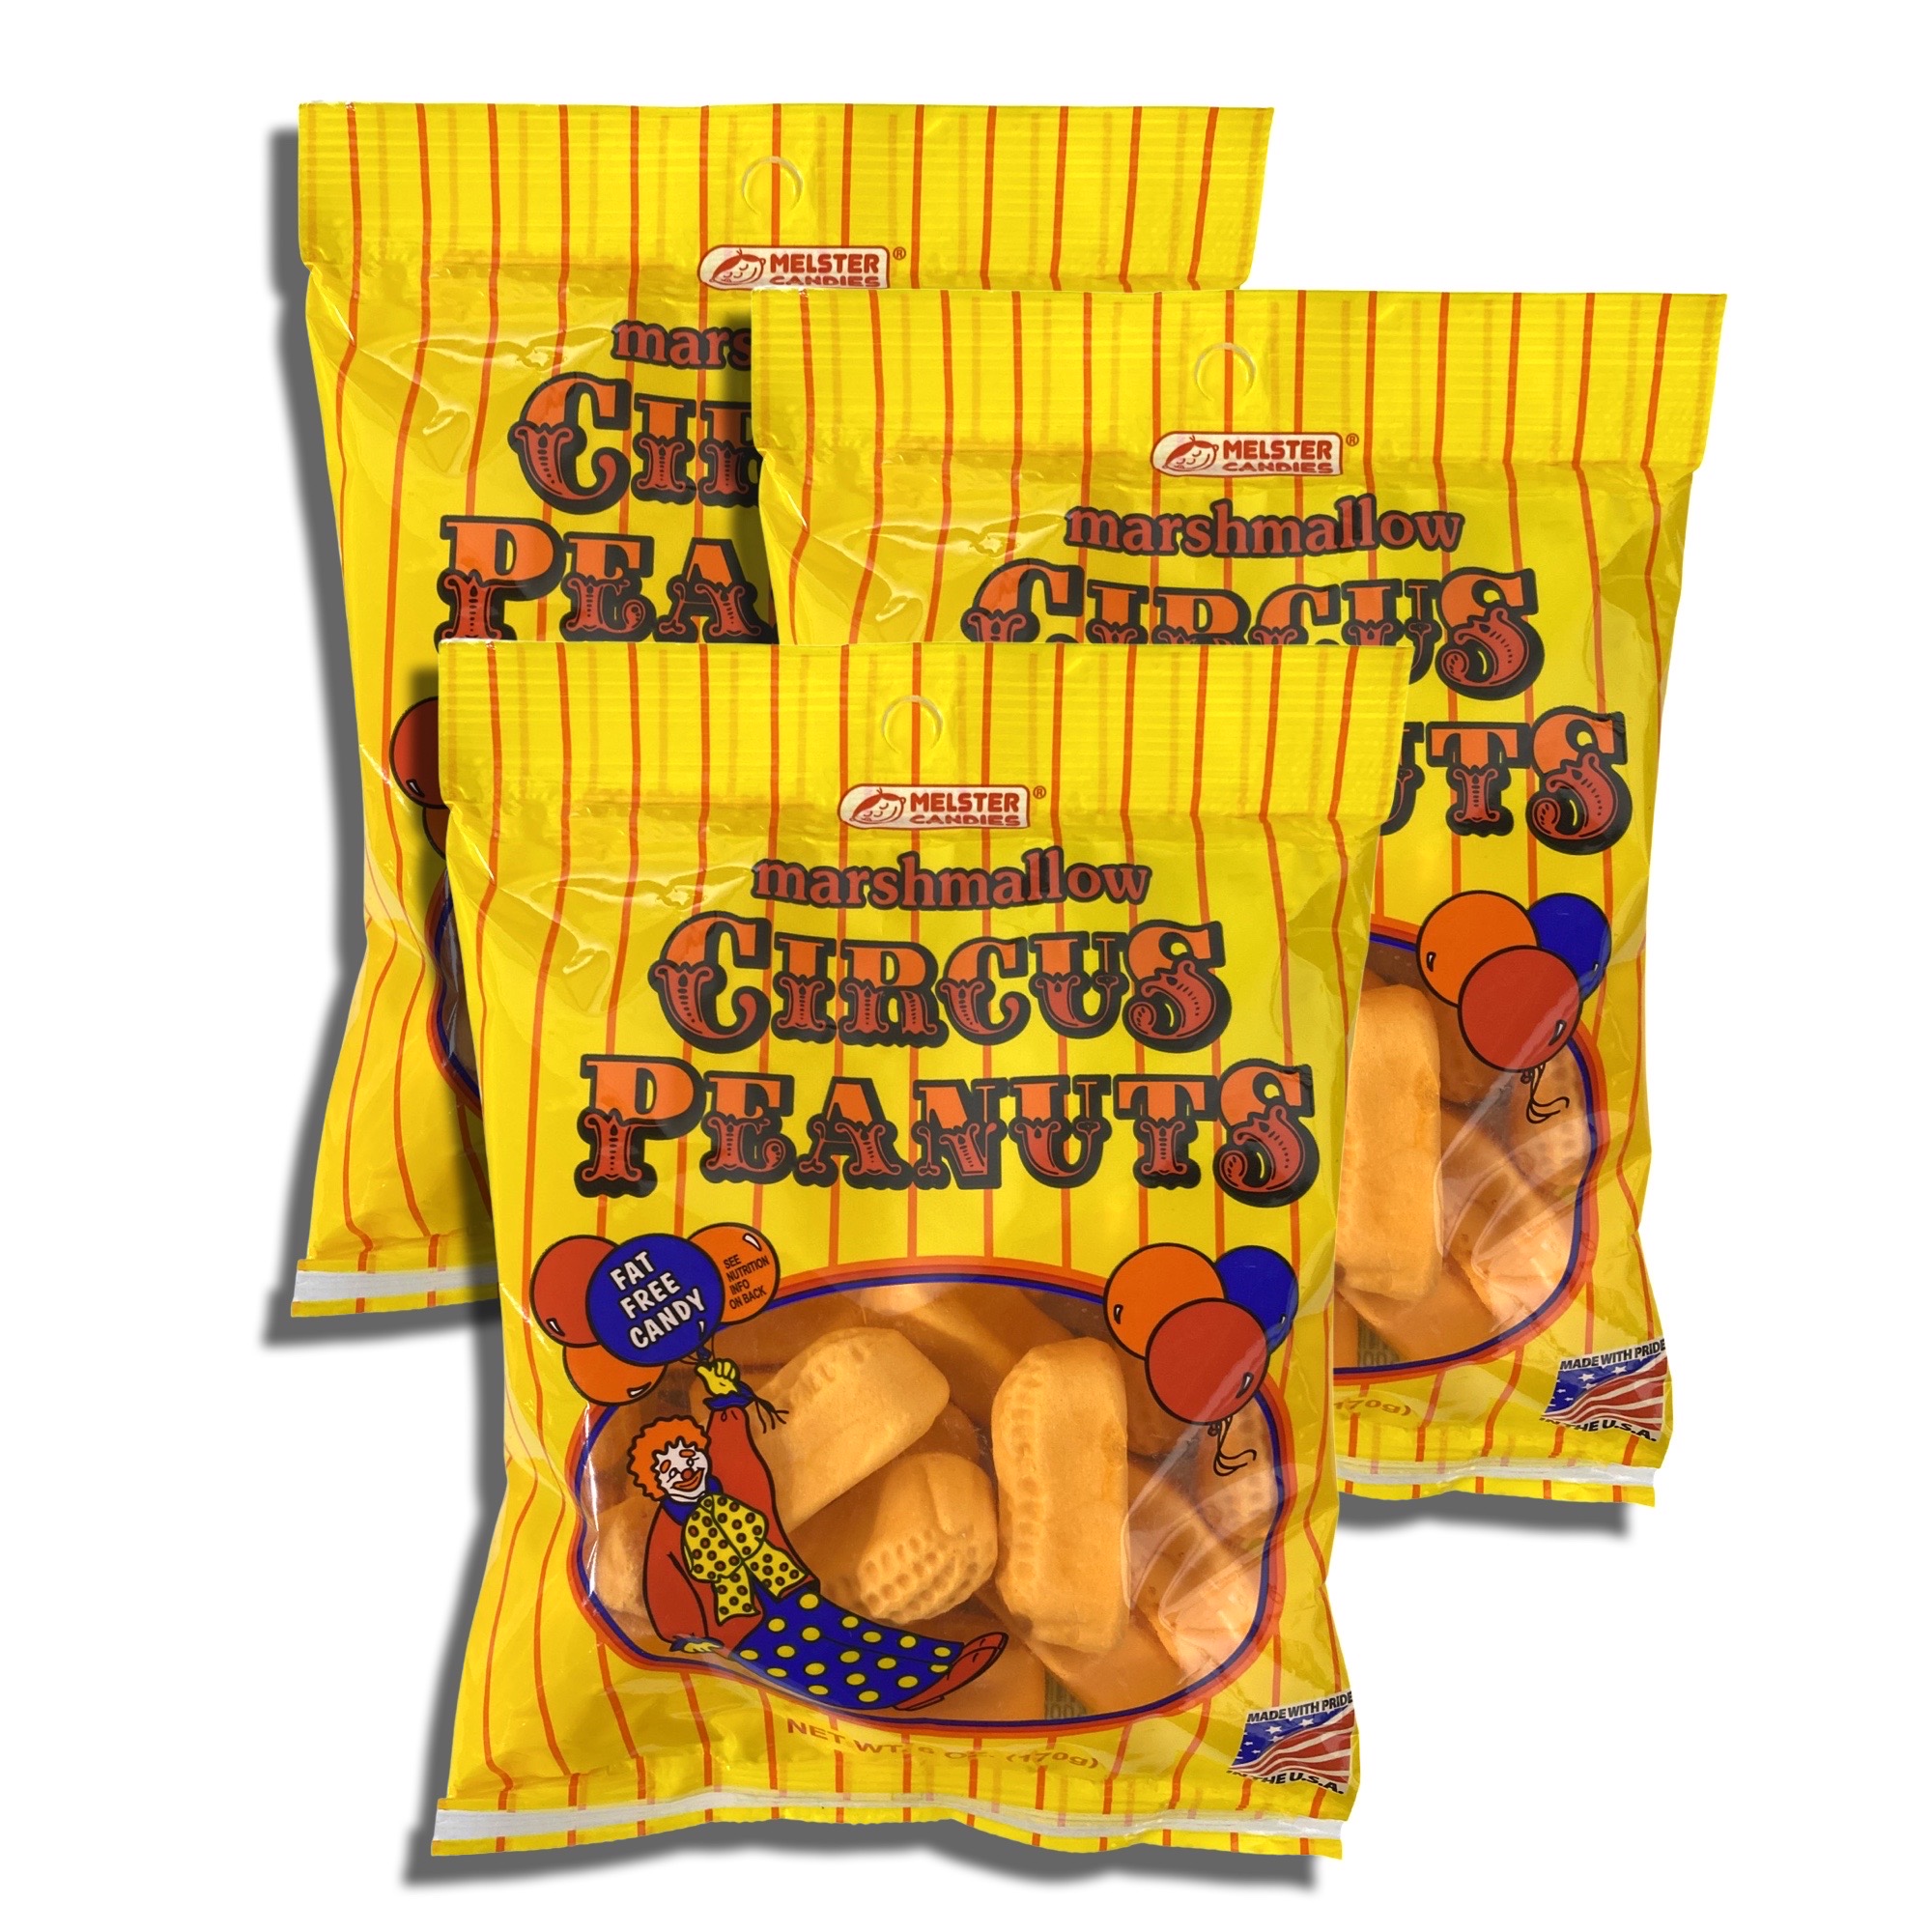 Marshmallow Circus Peanuts by Melster Bundled by Tribeca Curations | 6 Oz | Value Case Pack of 12 bags - image 4 of 5